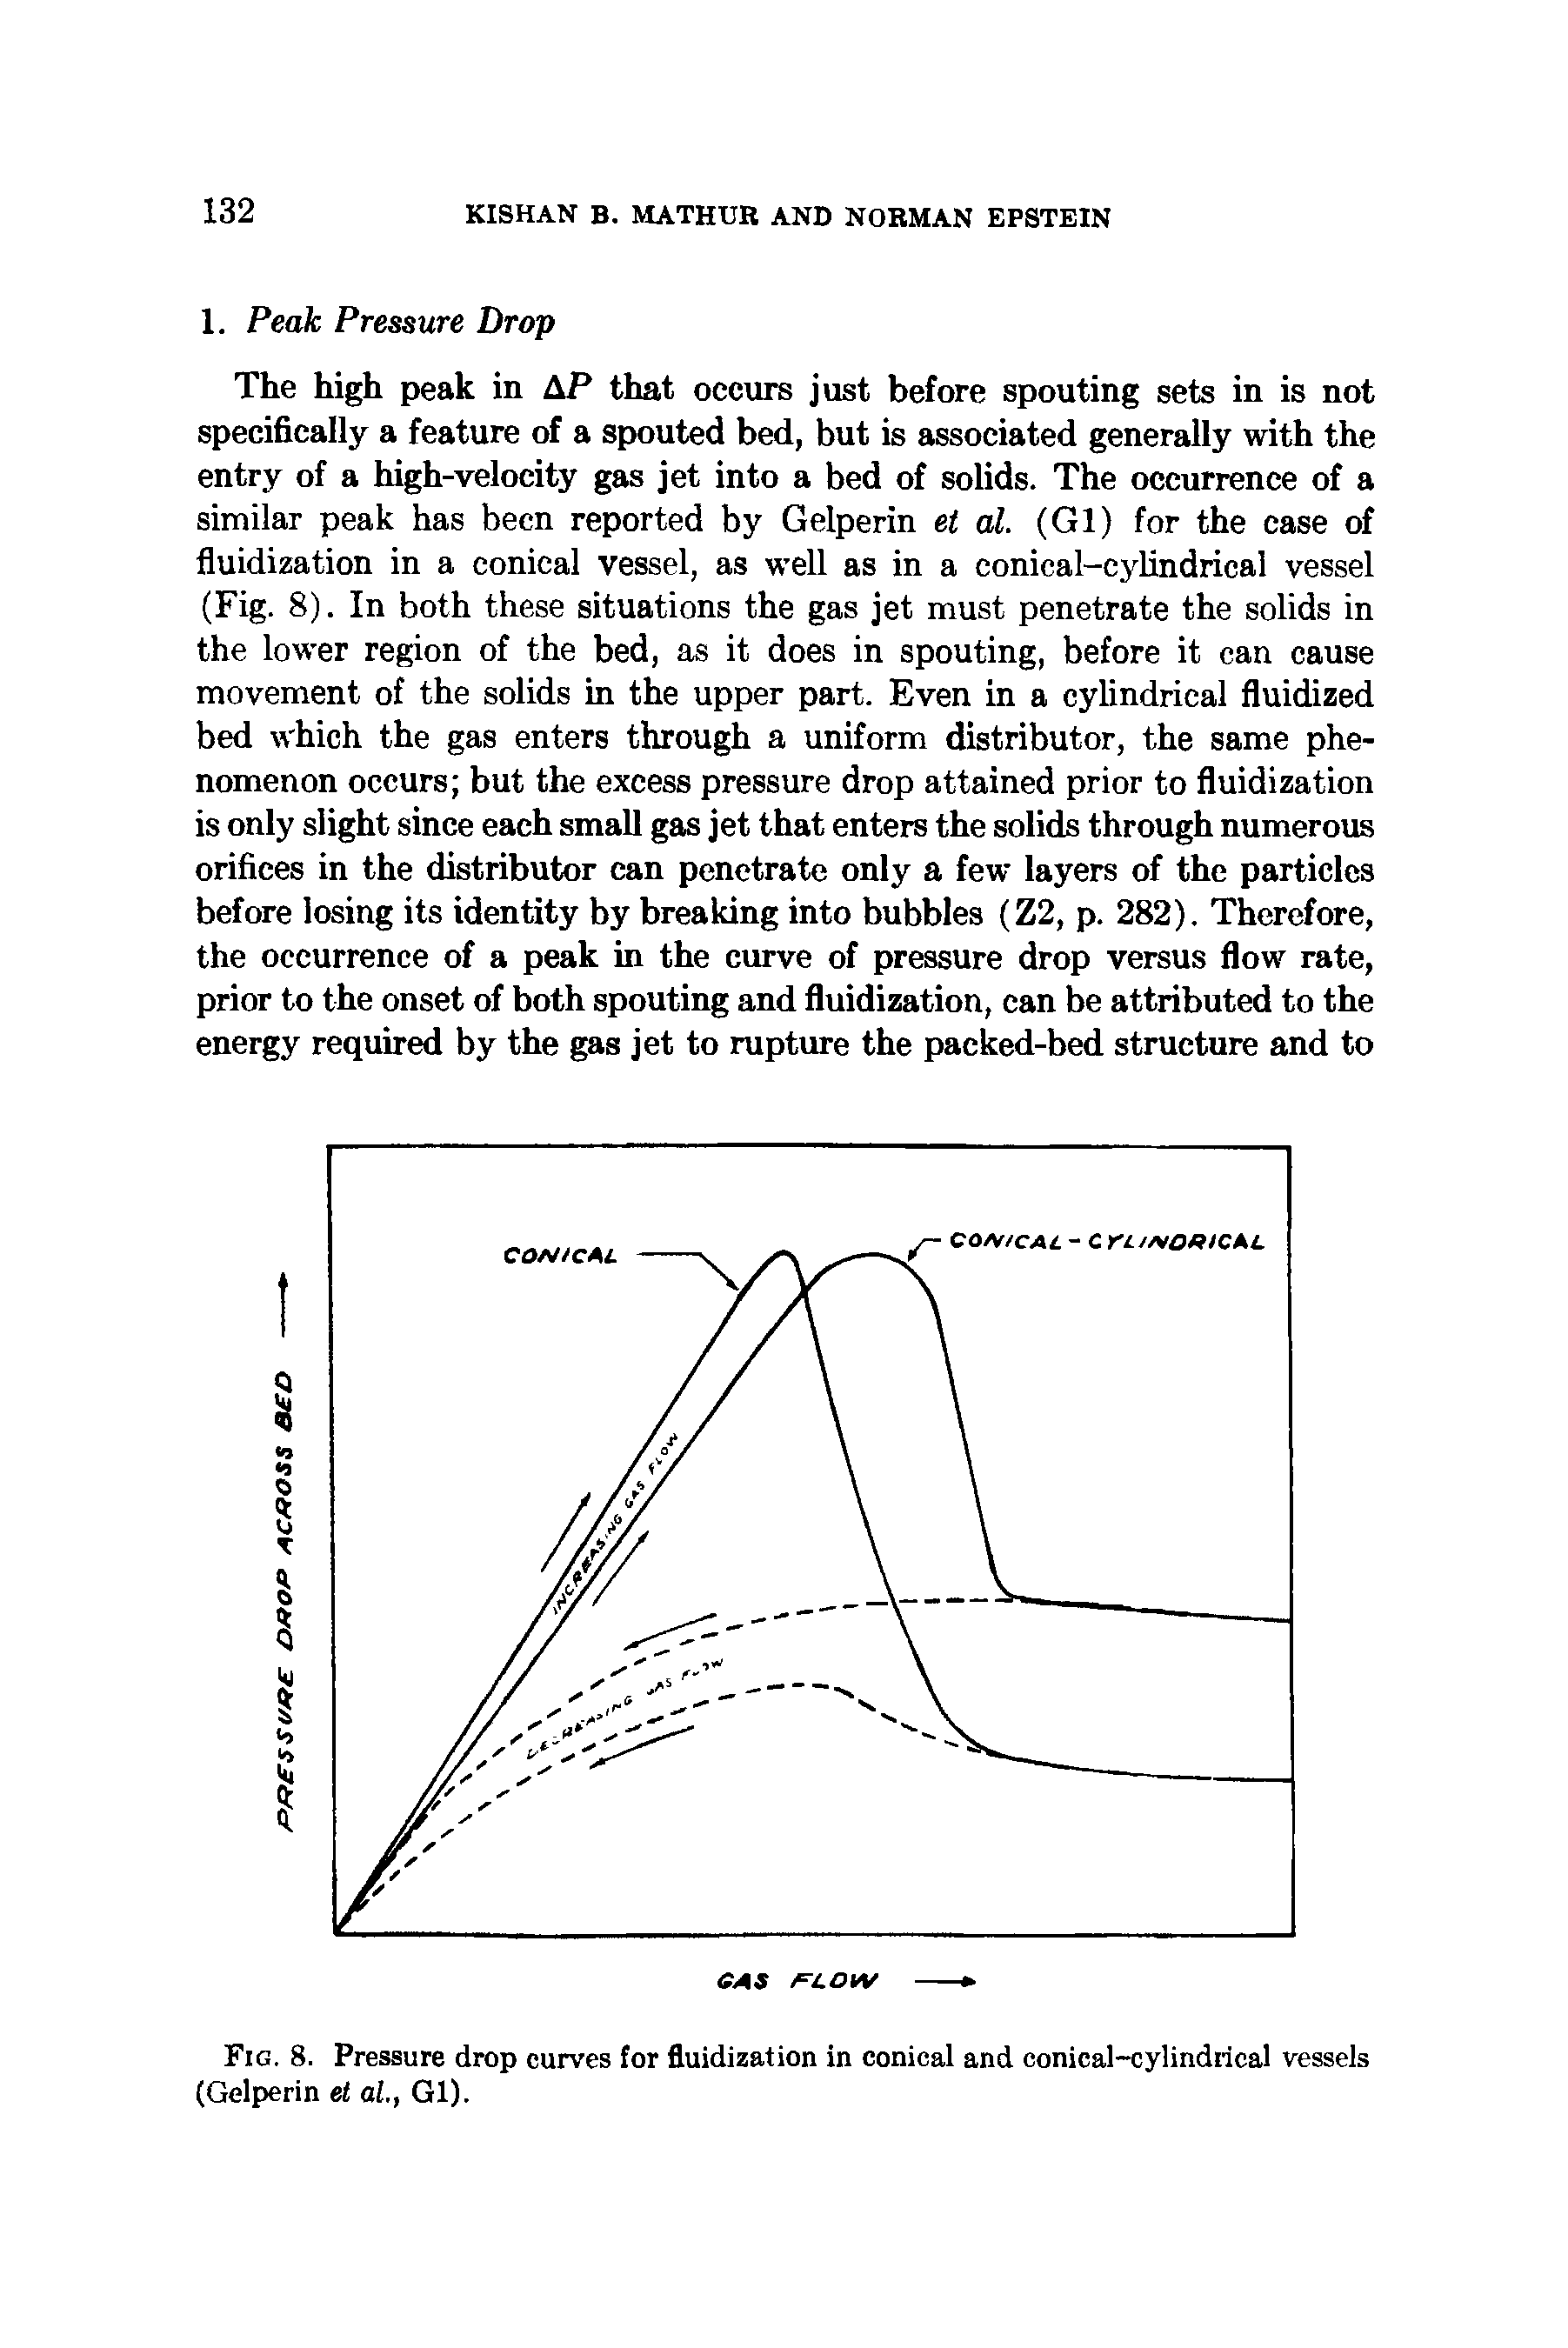 Fig. 8. Pressure drop curves for fluidization in conical and conical-cylindrical vessels (Gelperin et at, Gl).